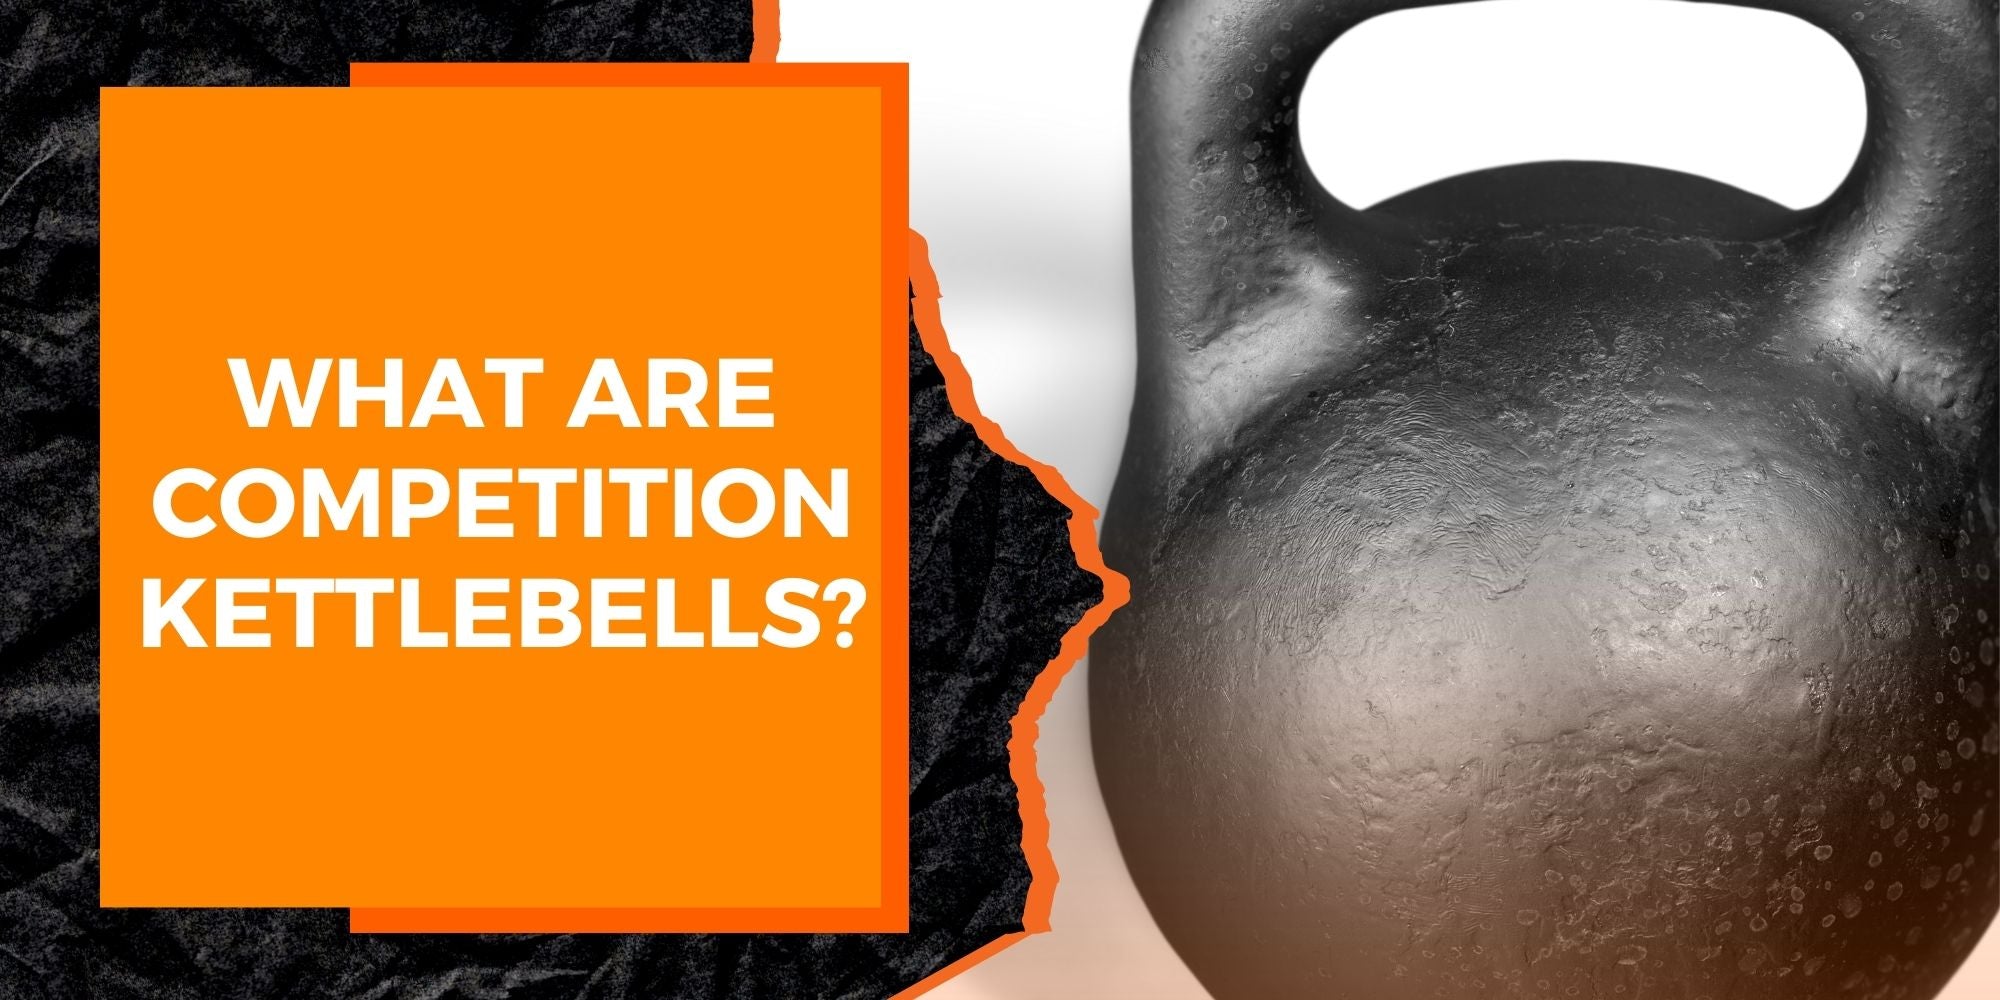 What Are Competition Kettlebells?